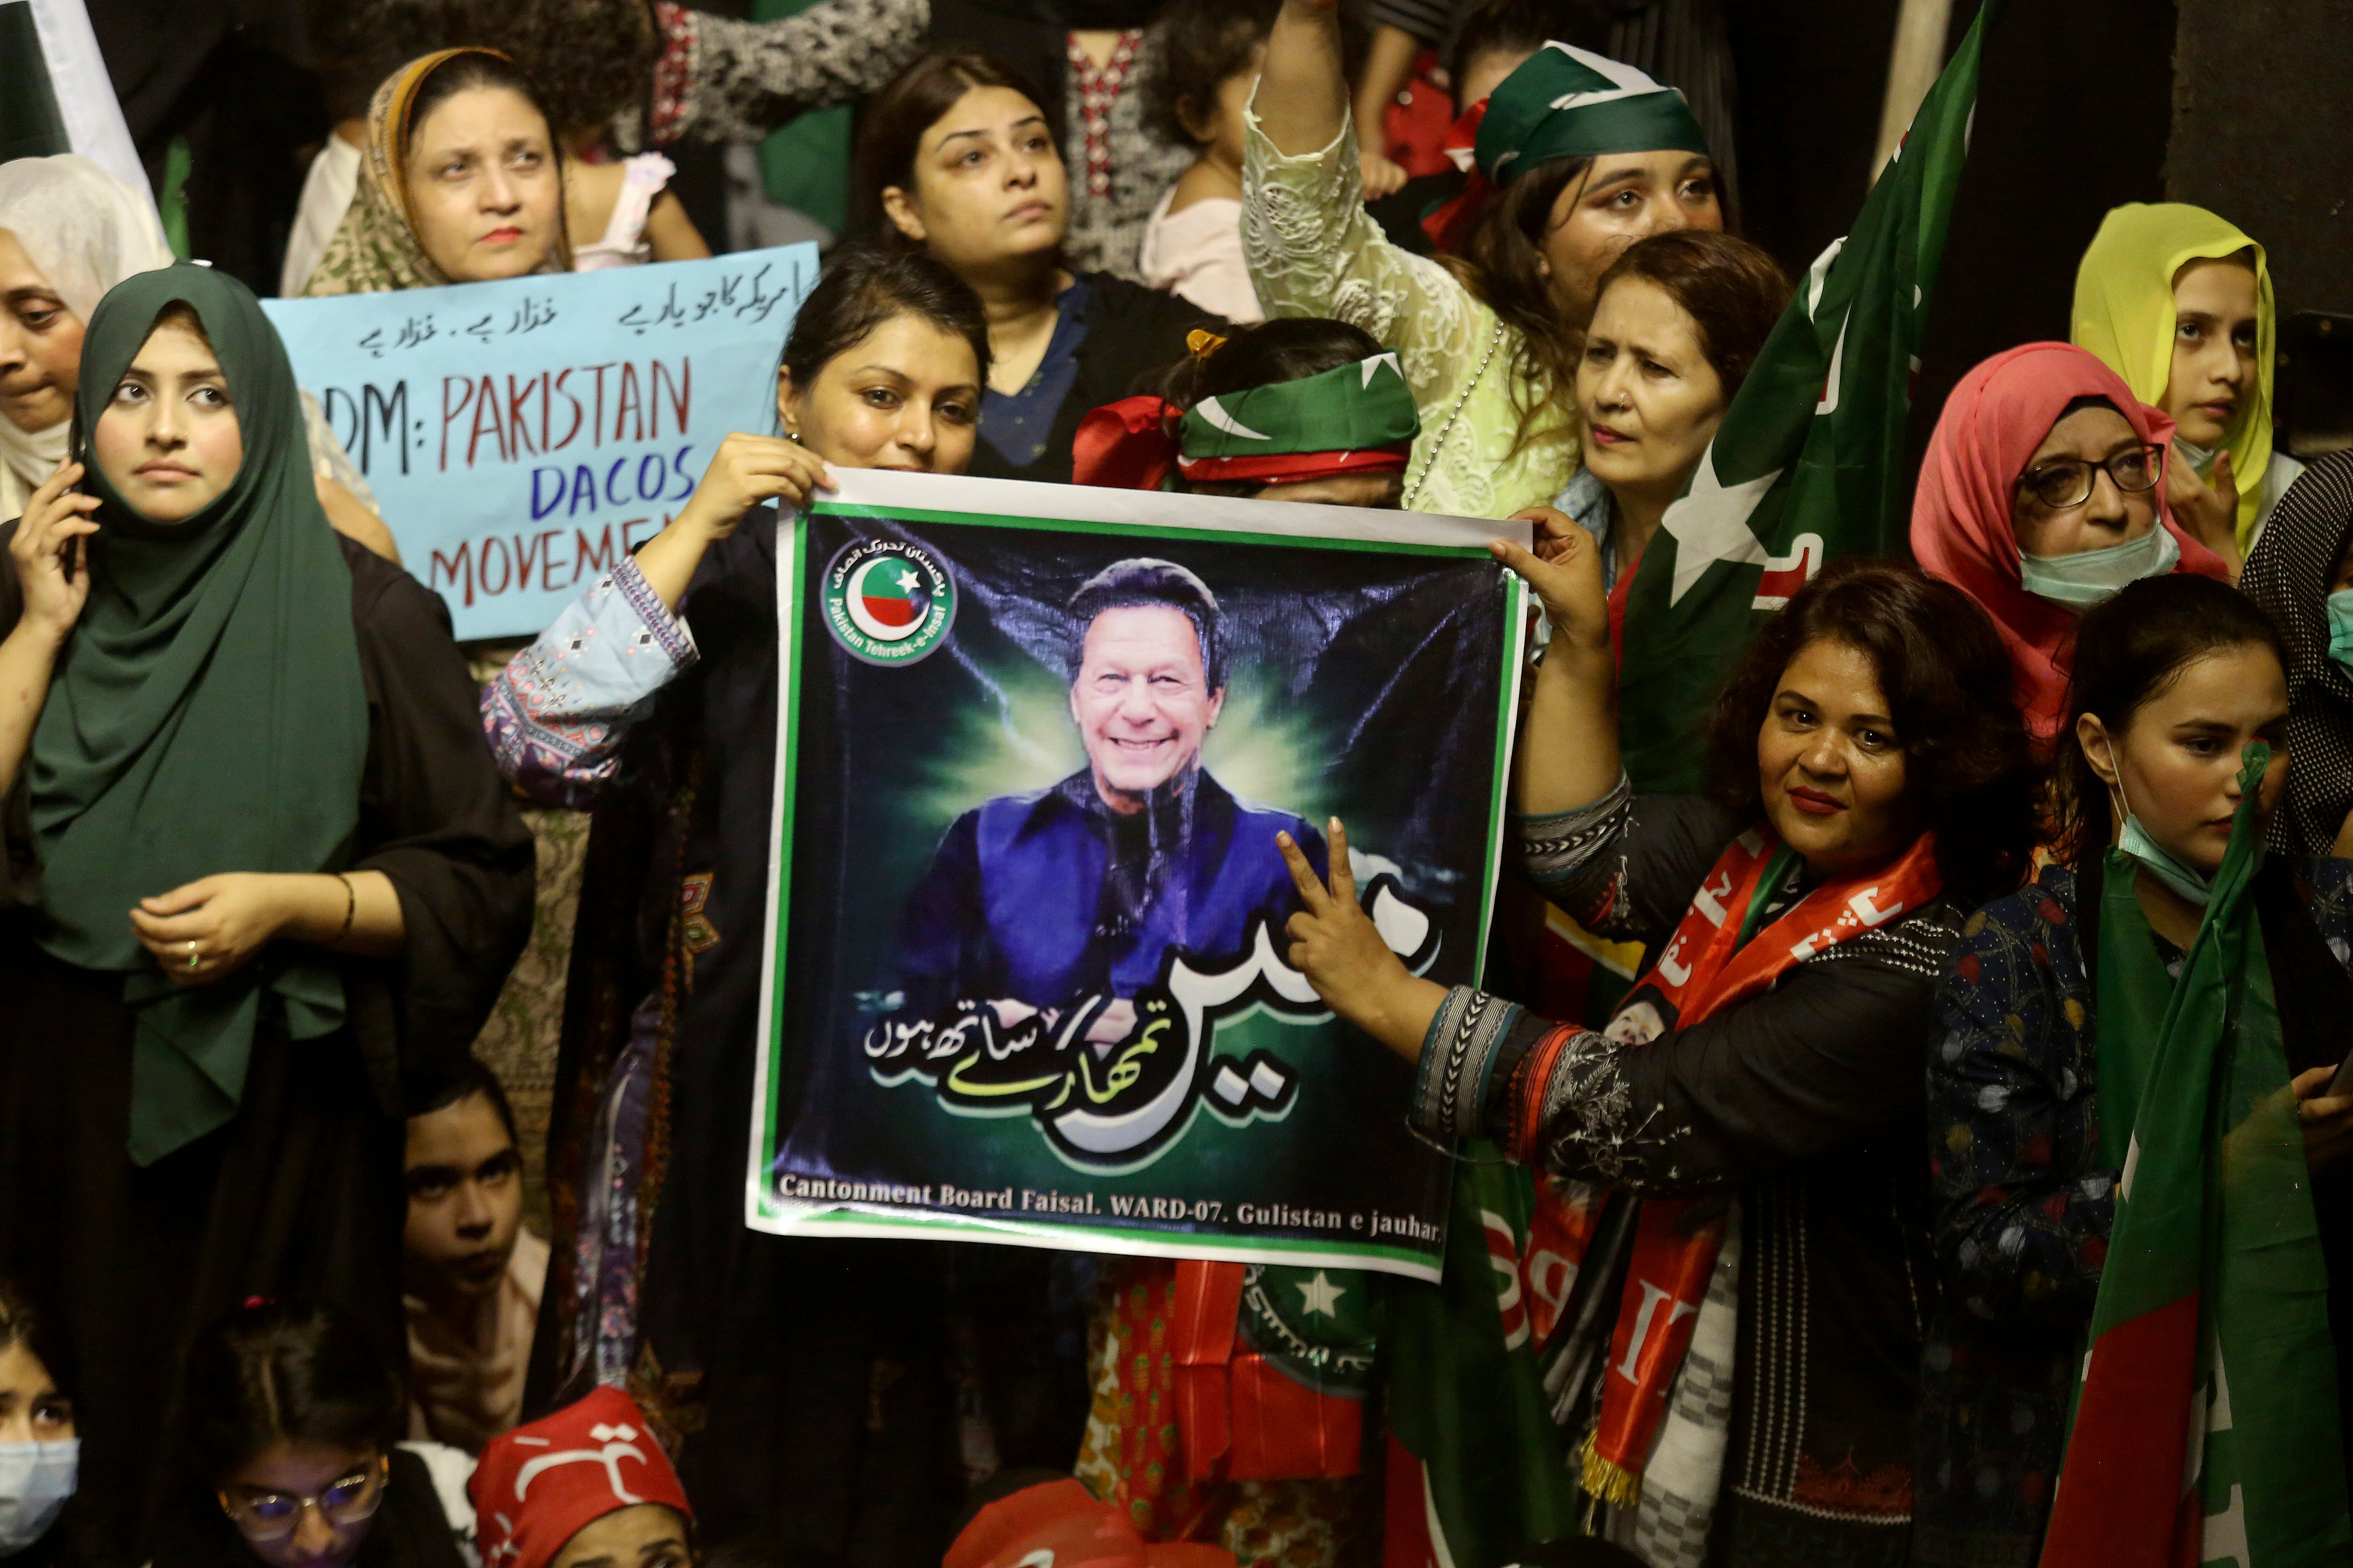 Supporters of deposed Prime Minister Imran Khan's party participate in a rally to condemn the ouster of their leader's government, in Karachi